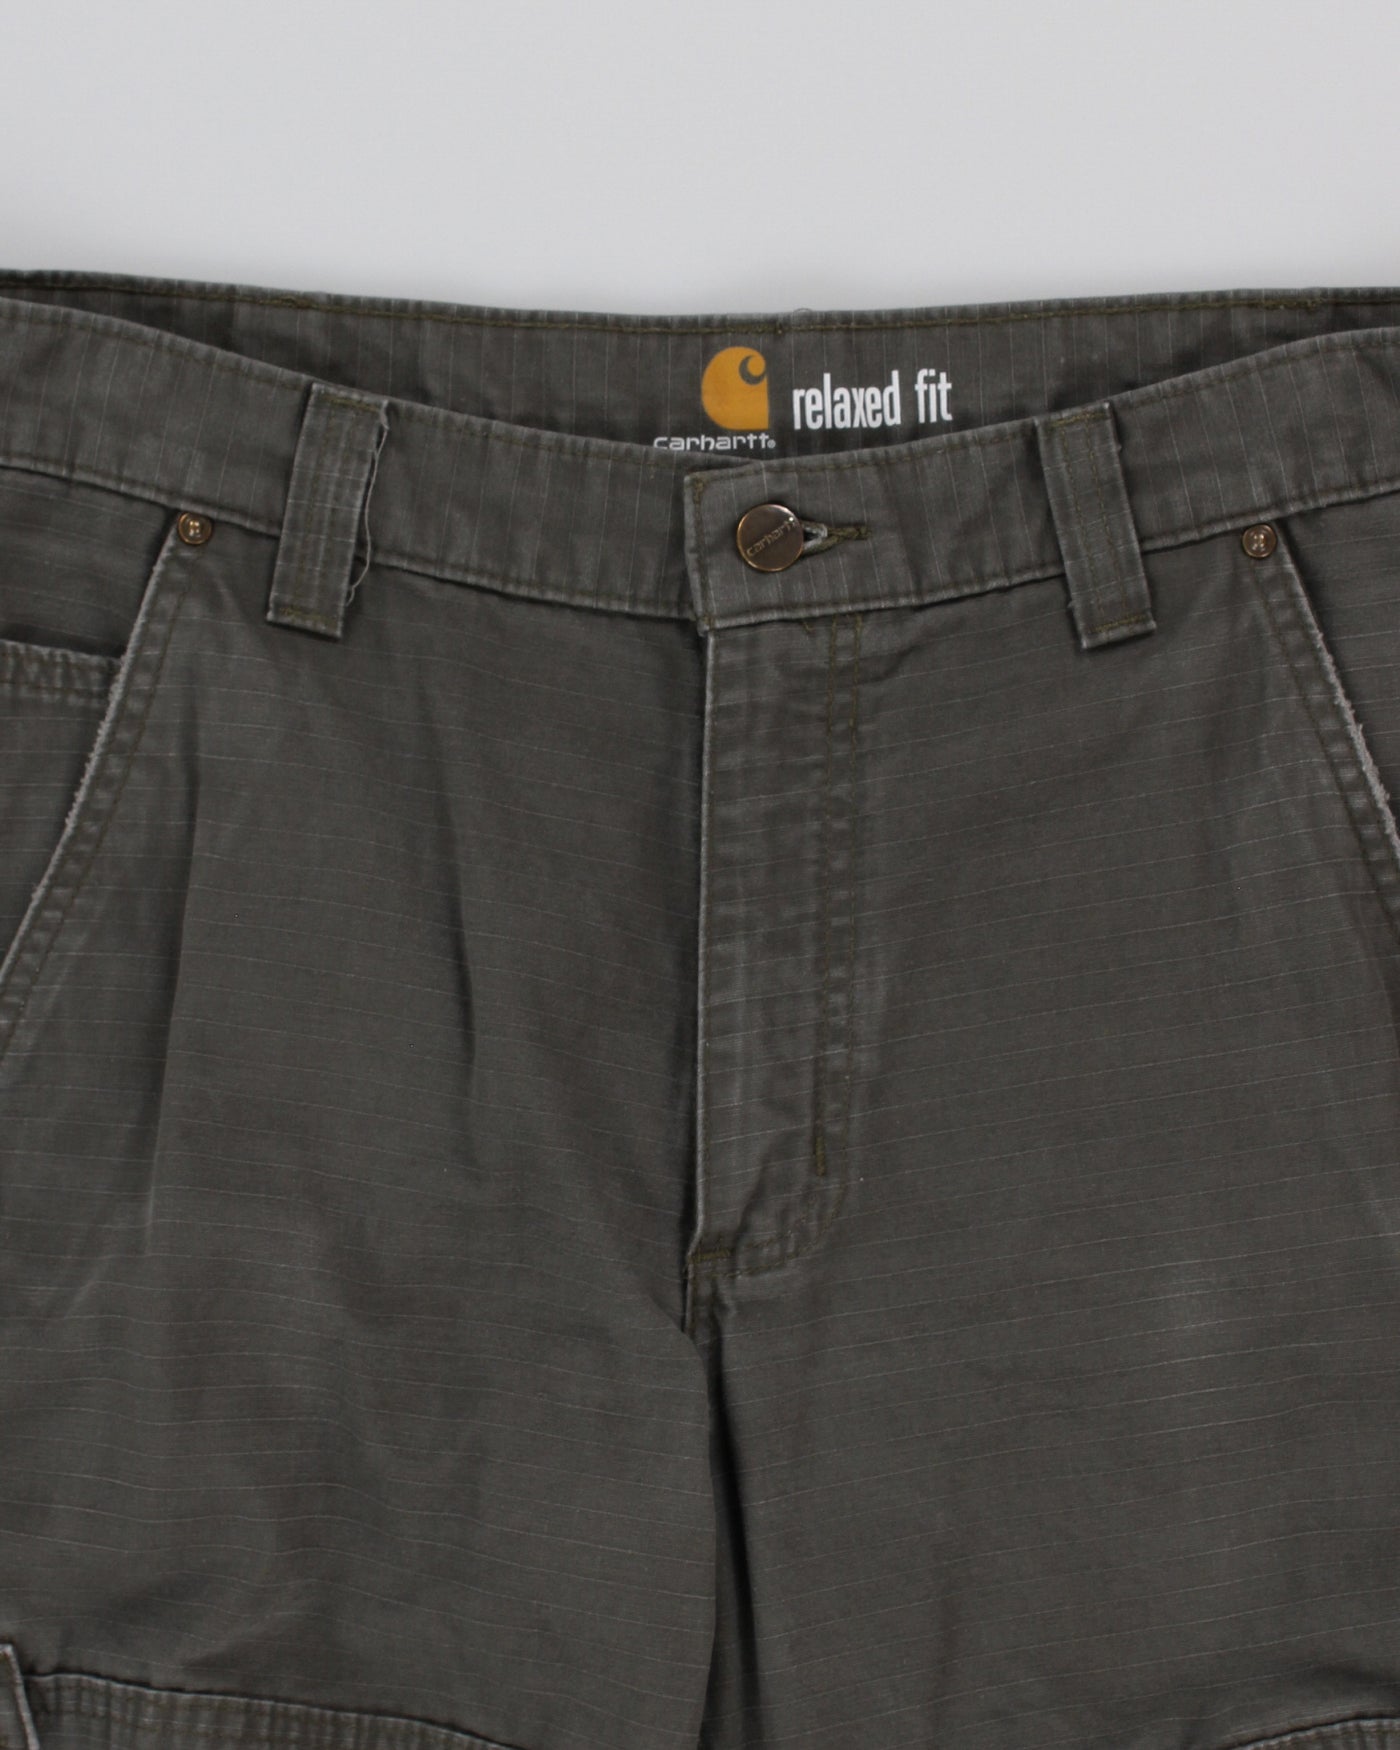 Carhartt Green Relaxed Fit Trousers - W34 L30